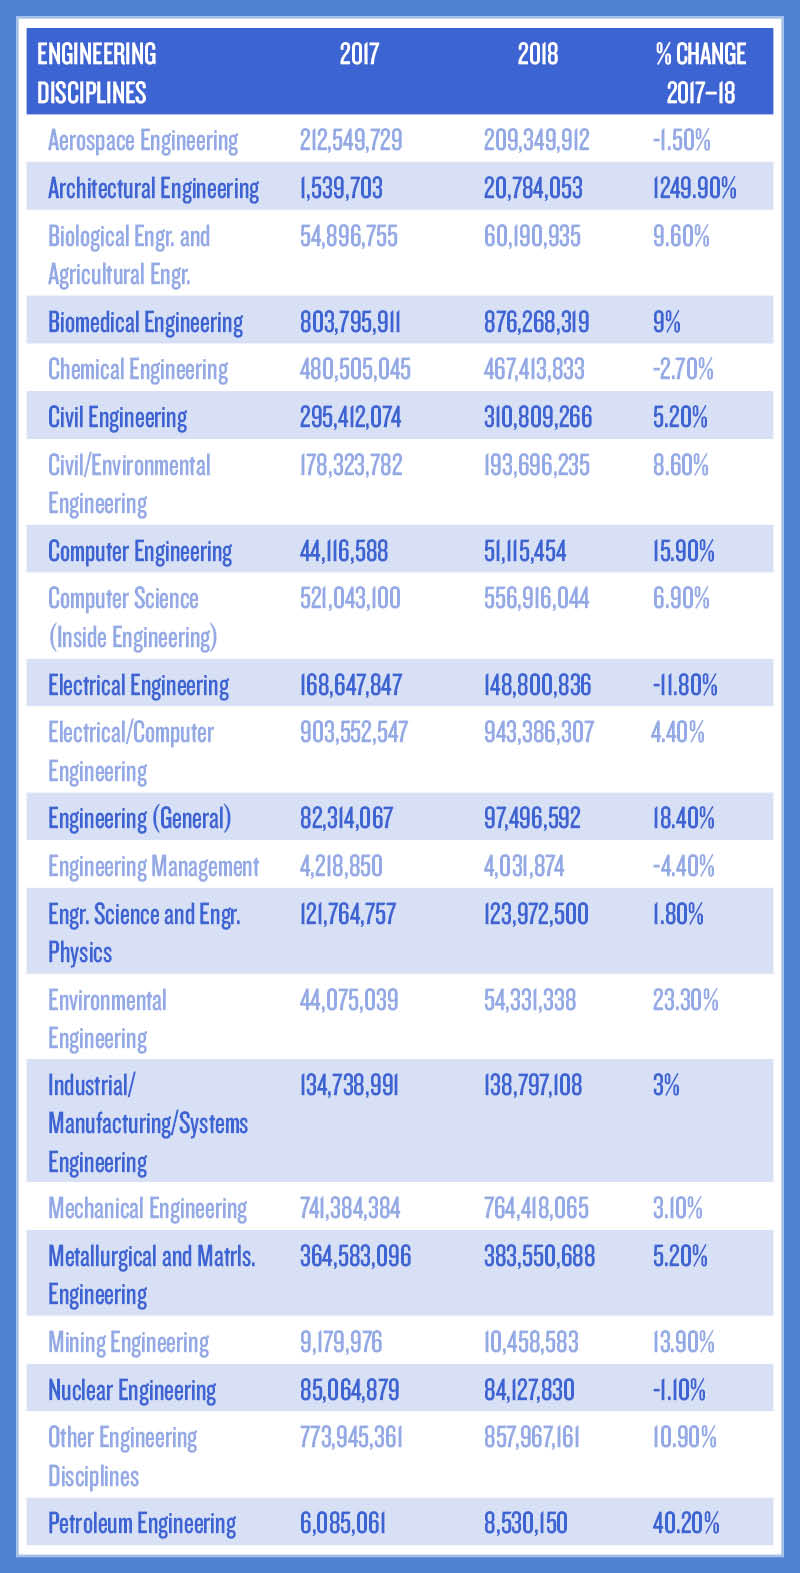 FEDERAL RESEARCH FUNDING BY ENGINEERING DISCIPLINE IN 2018